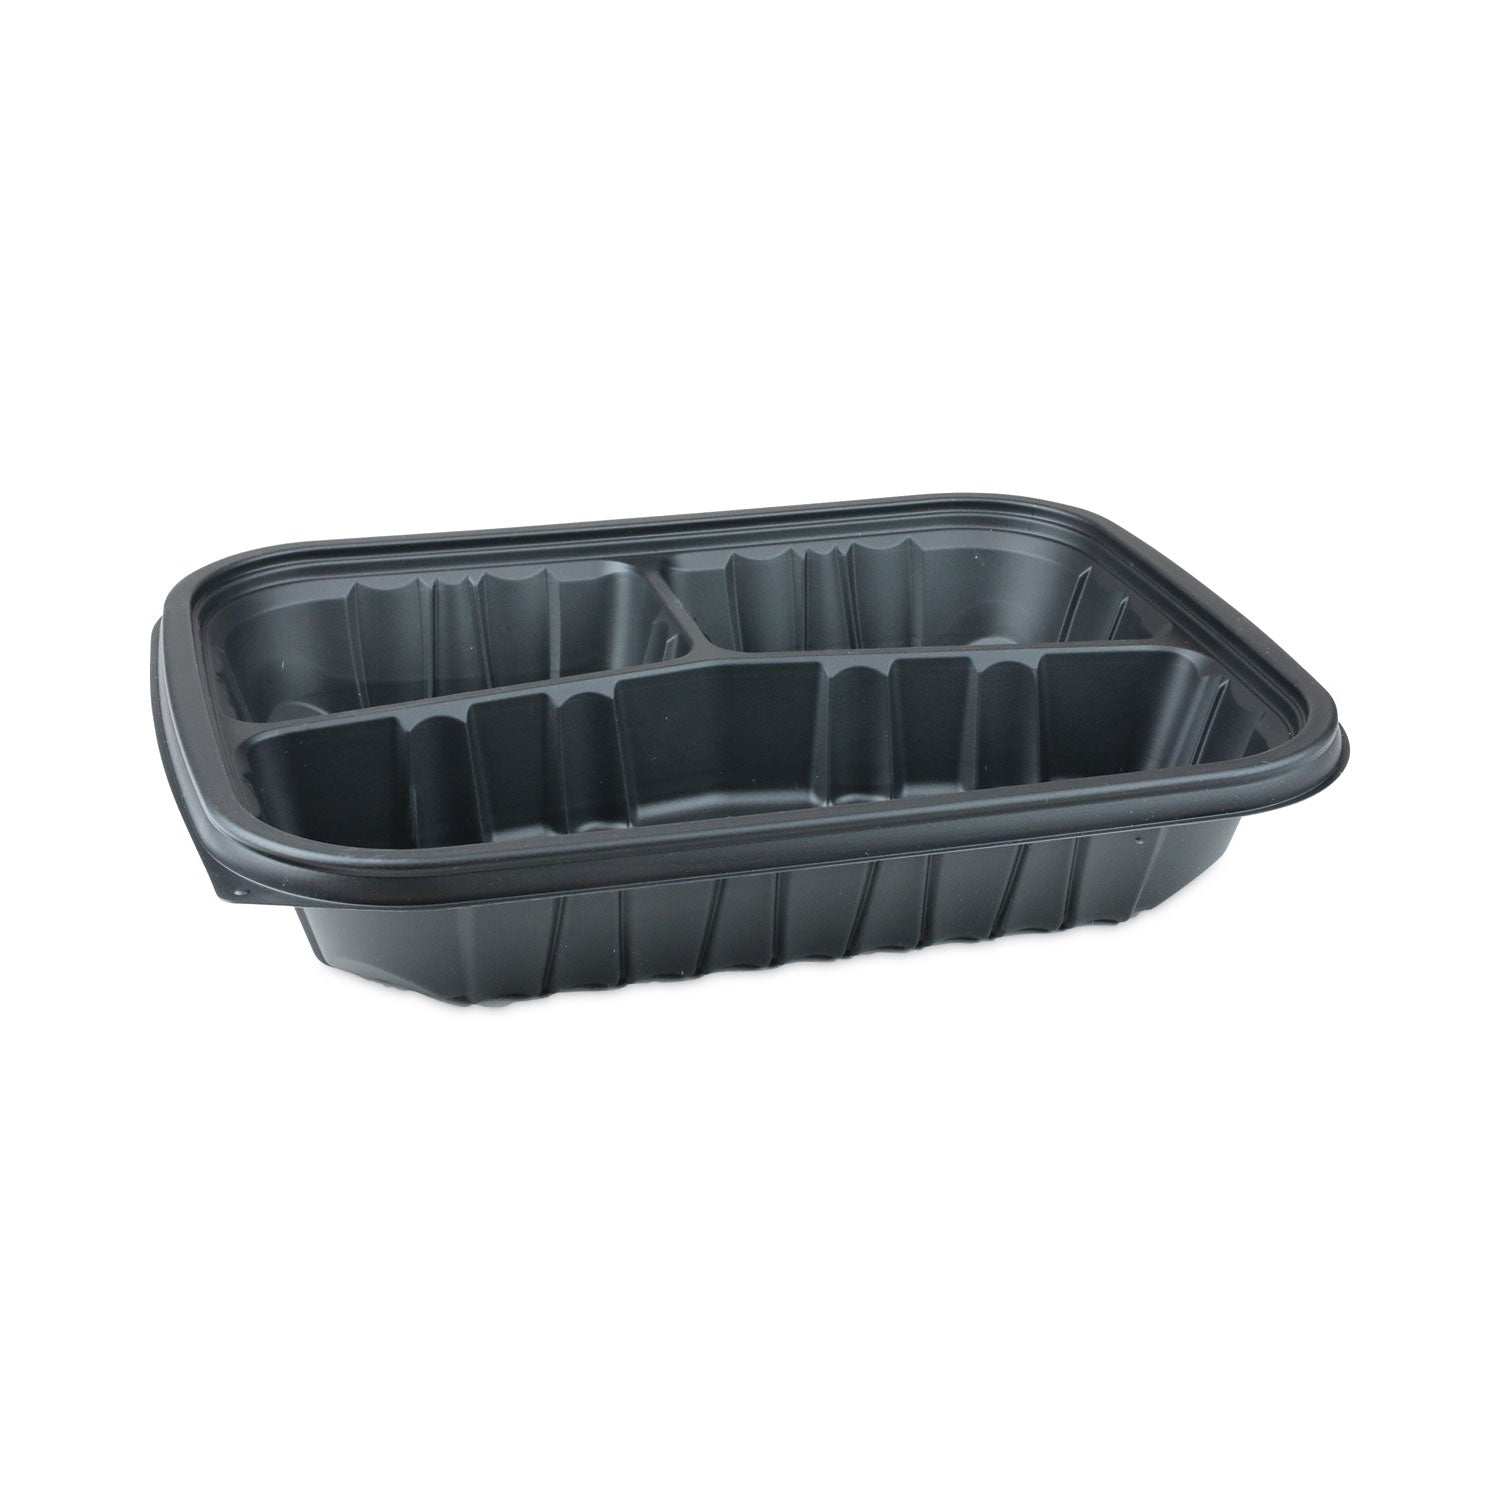 earthchoice-entree2go-takeout-container-3-compartment-48-oz-1175-x-875-x-213-black-plastic-200-carton_pctycnb12x95203 - 1